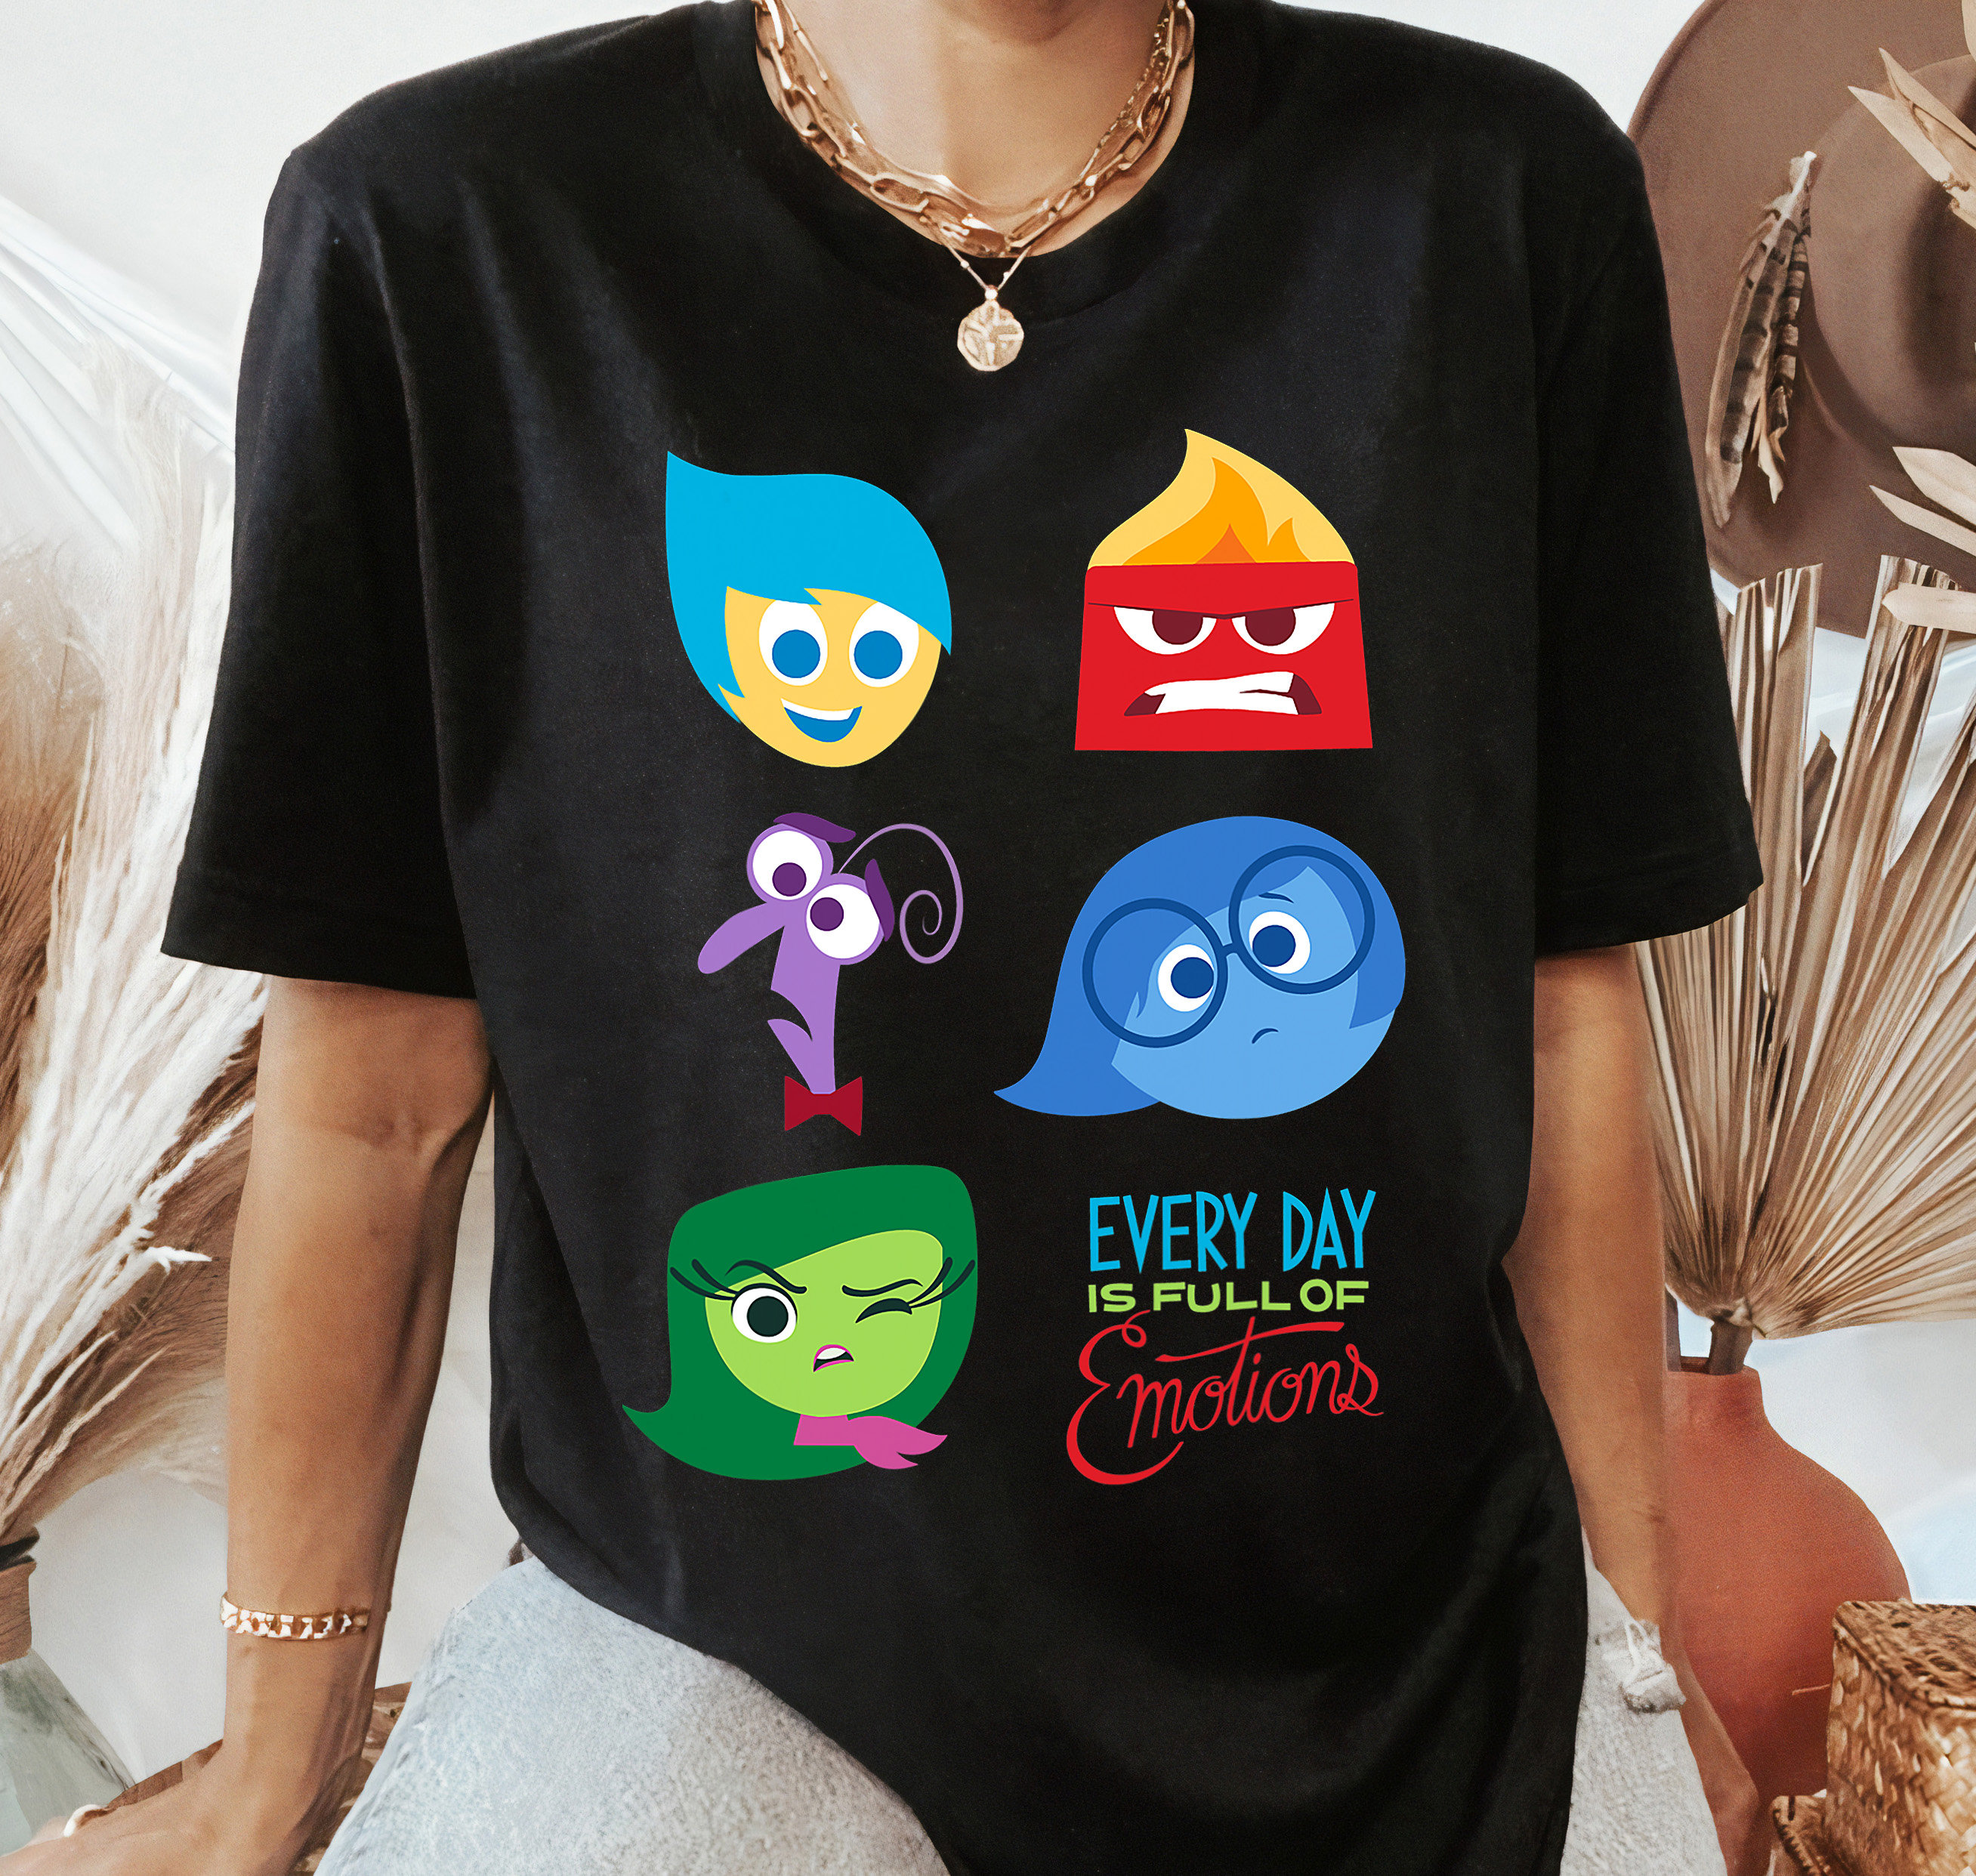 Trends Disney Pixar Inside Out Emotions Yearbook Group T-Shirt